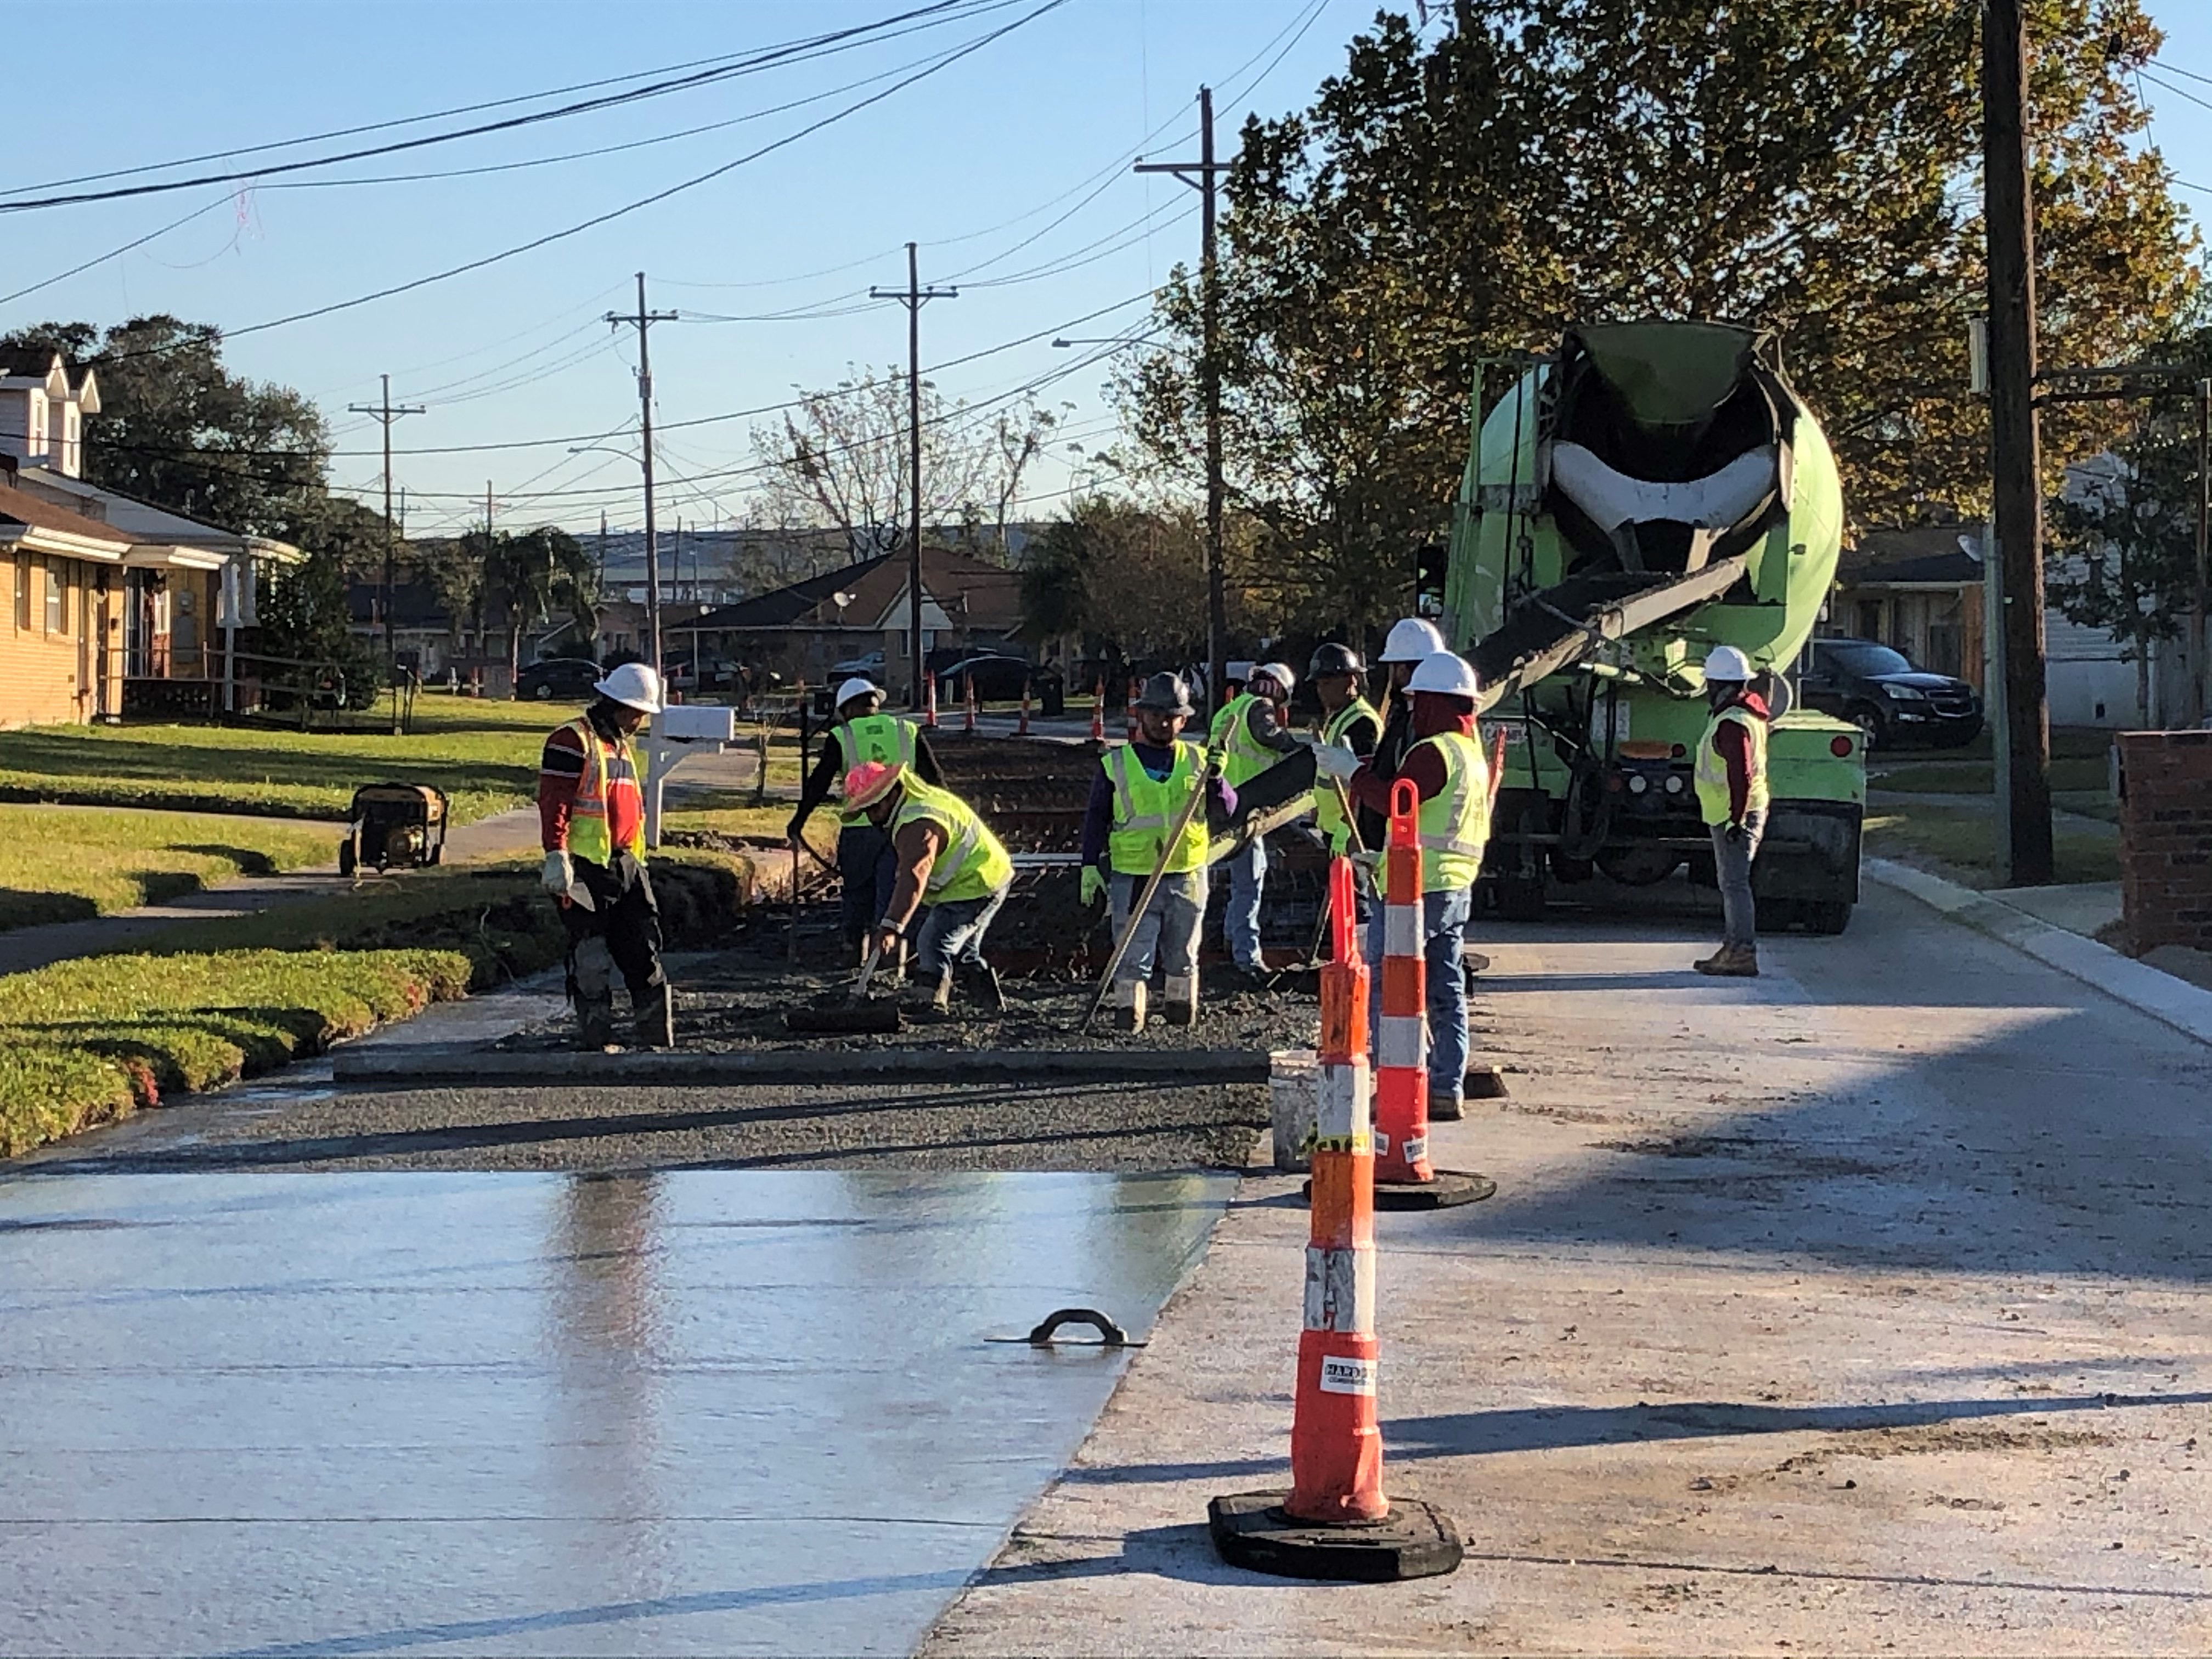 PONTCHARTRAIN PARK GROUP A PROJECT WORKS TO GIVE RESIDENTS NEW CONCRETE ROADWAYS